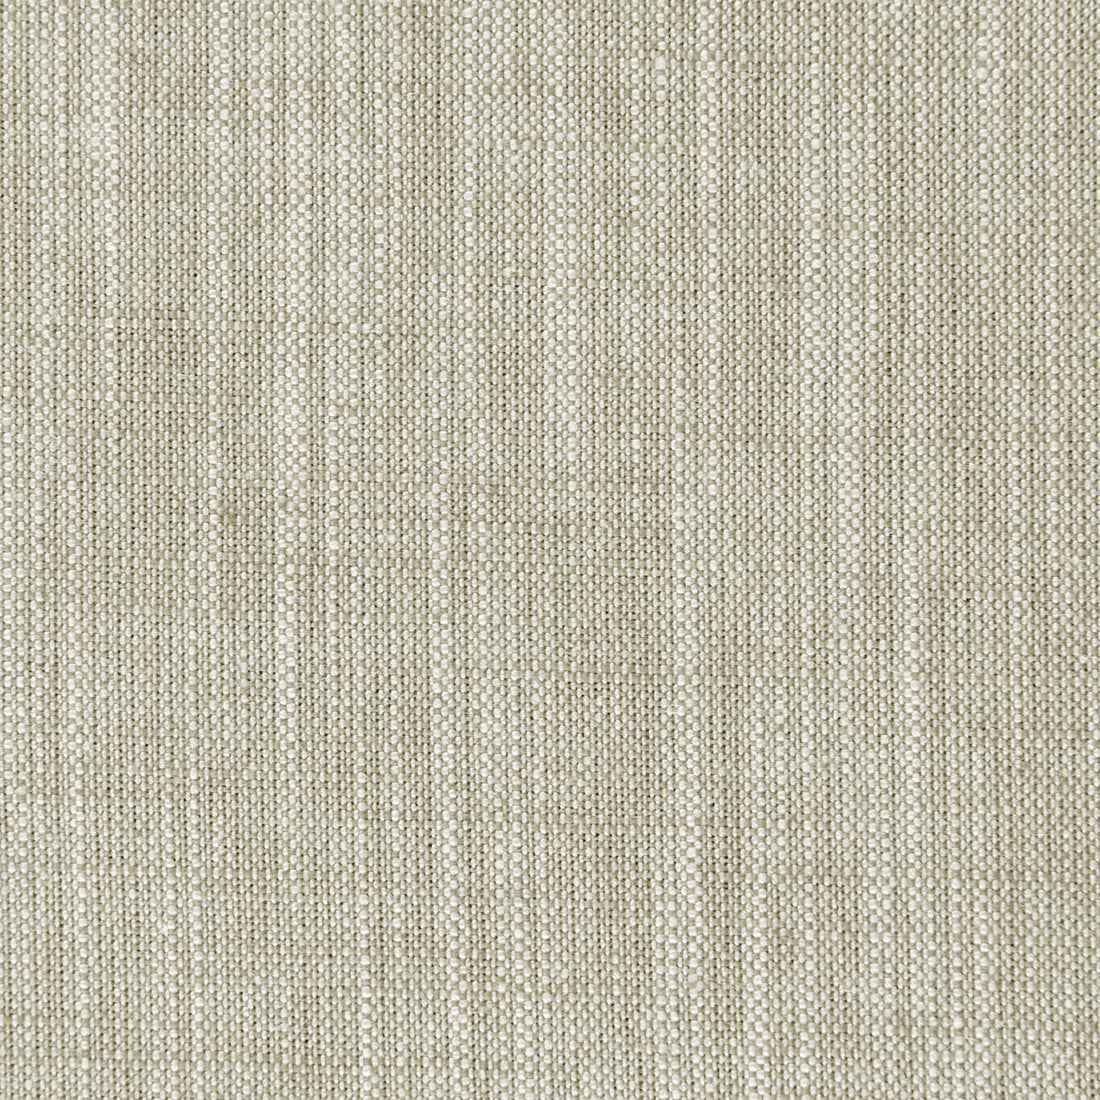 Biarritz fabric in jute color - pattern F0965/24.CAC.0 - by Clarke And Clarke in the Clarke &amp; Clarke Biarritz collection